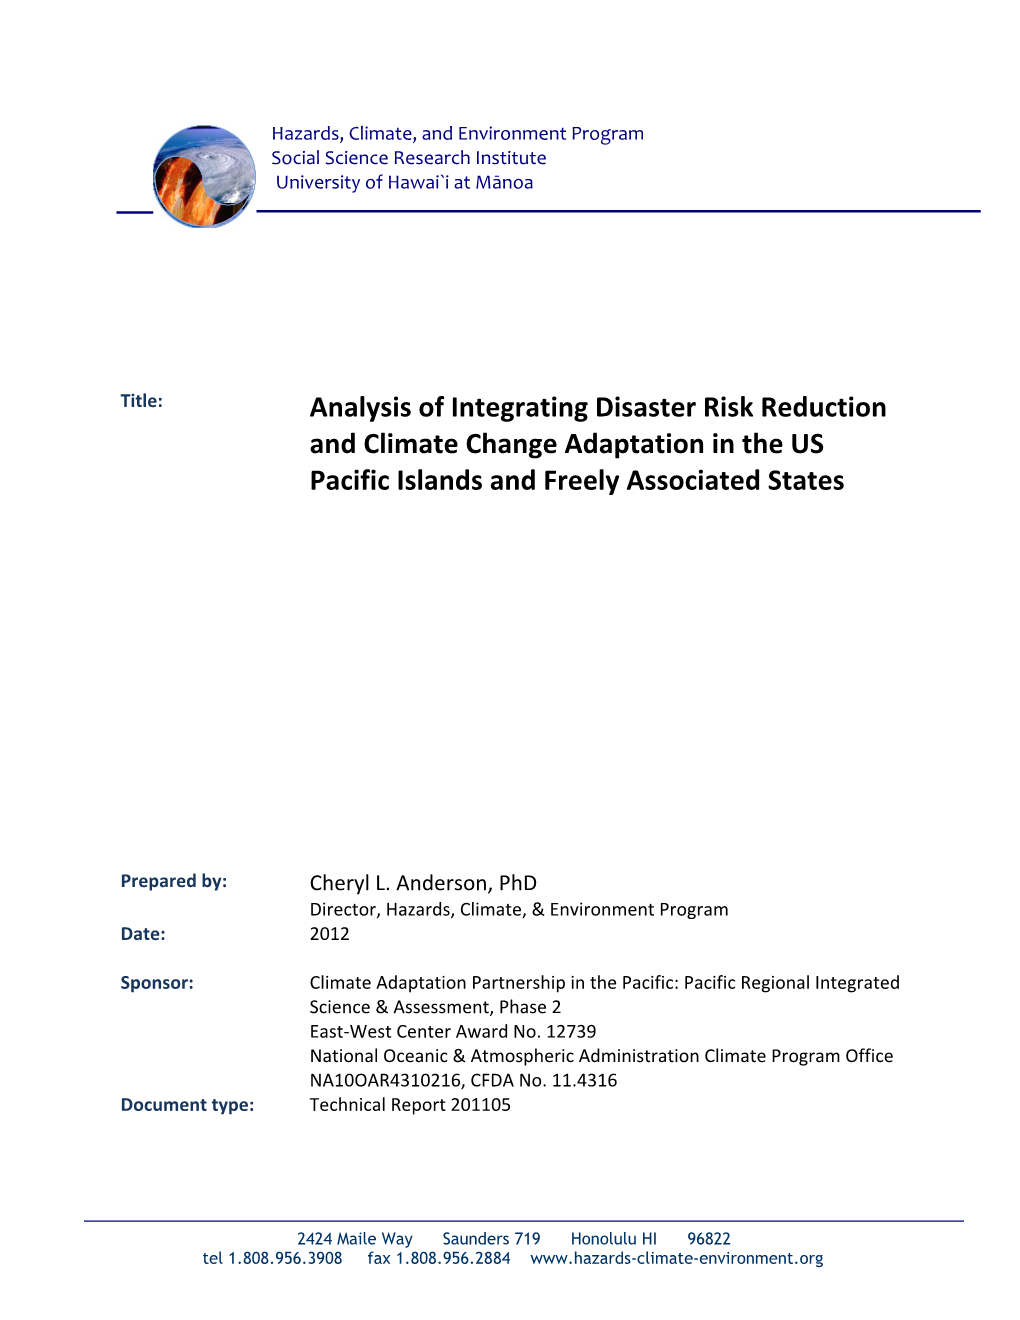 Analysis of Integrating Disaster Risk Reduction and Climate Change